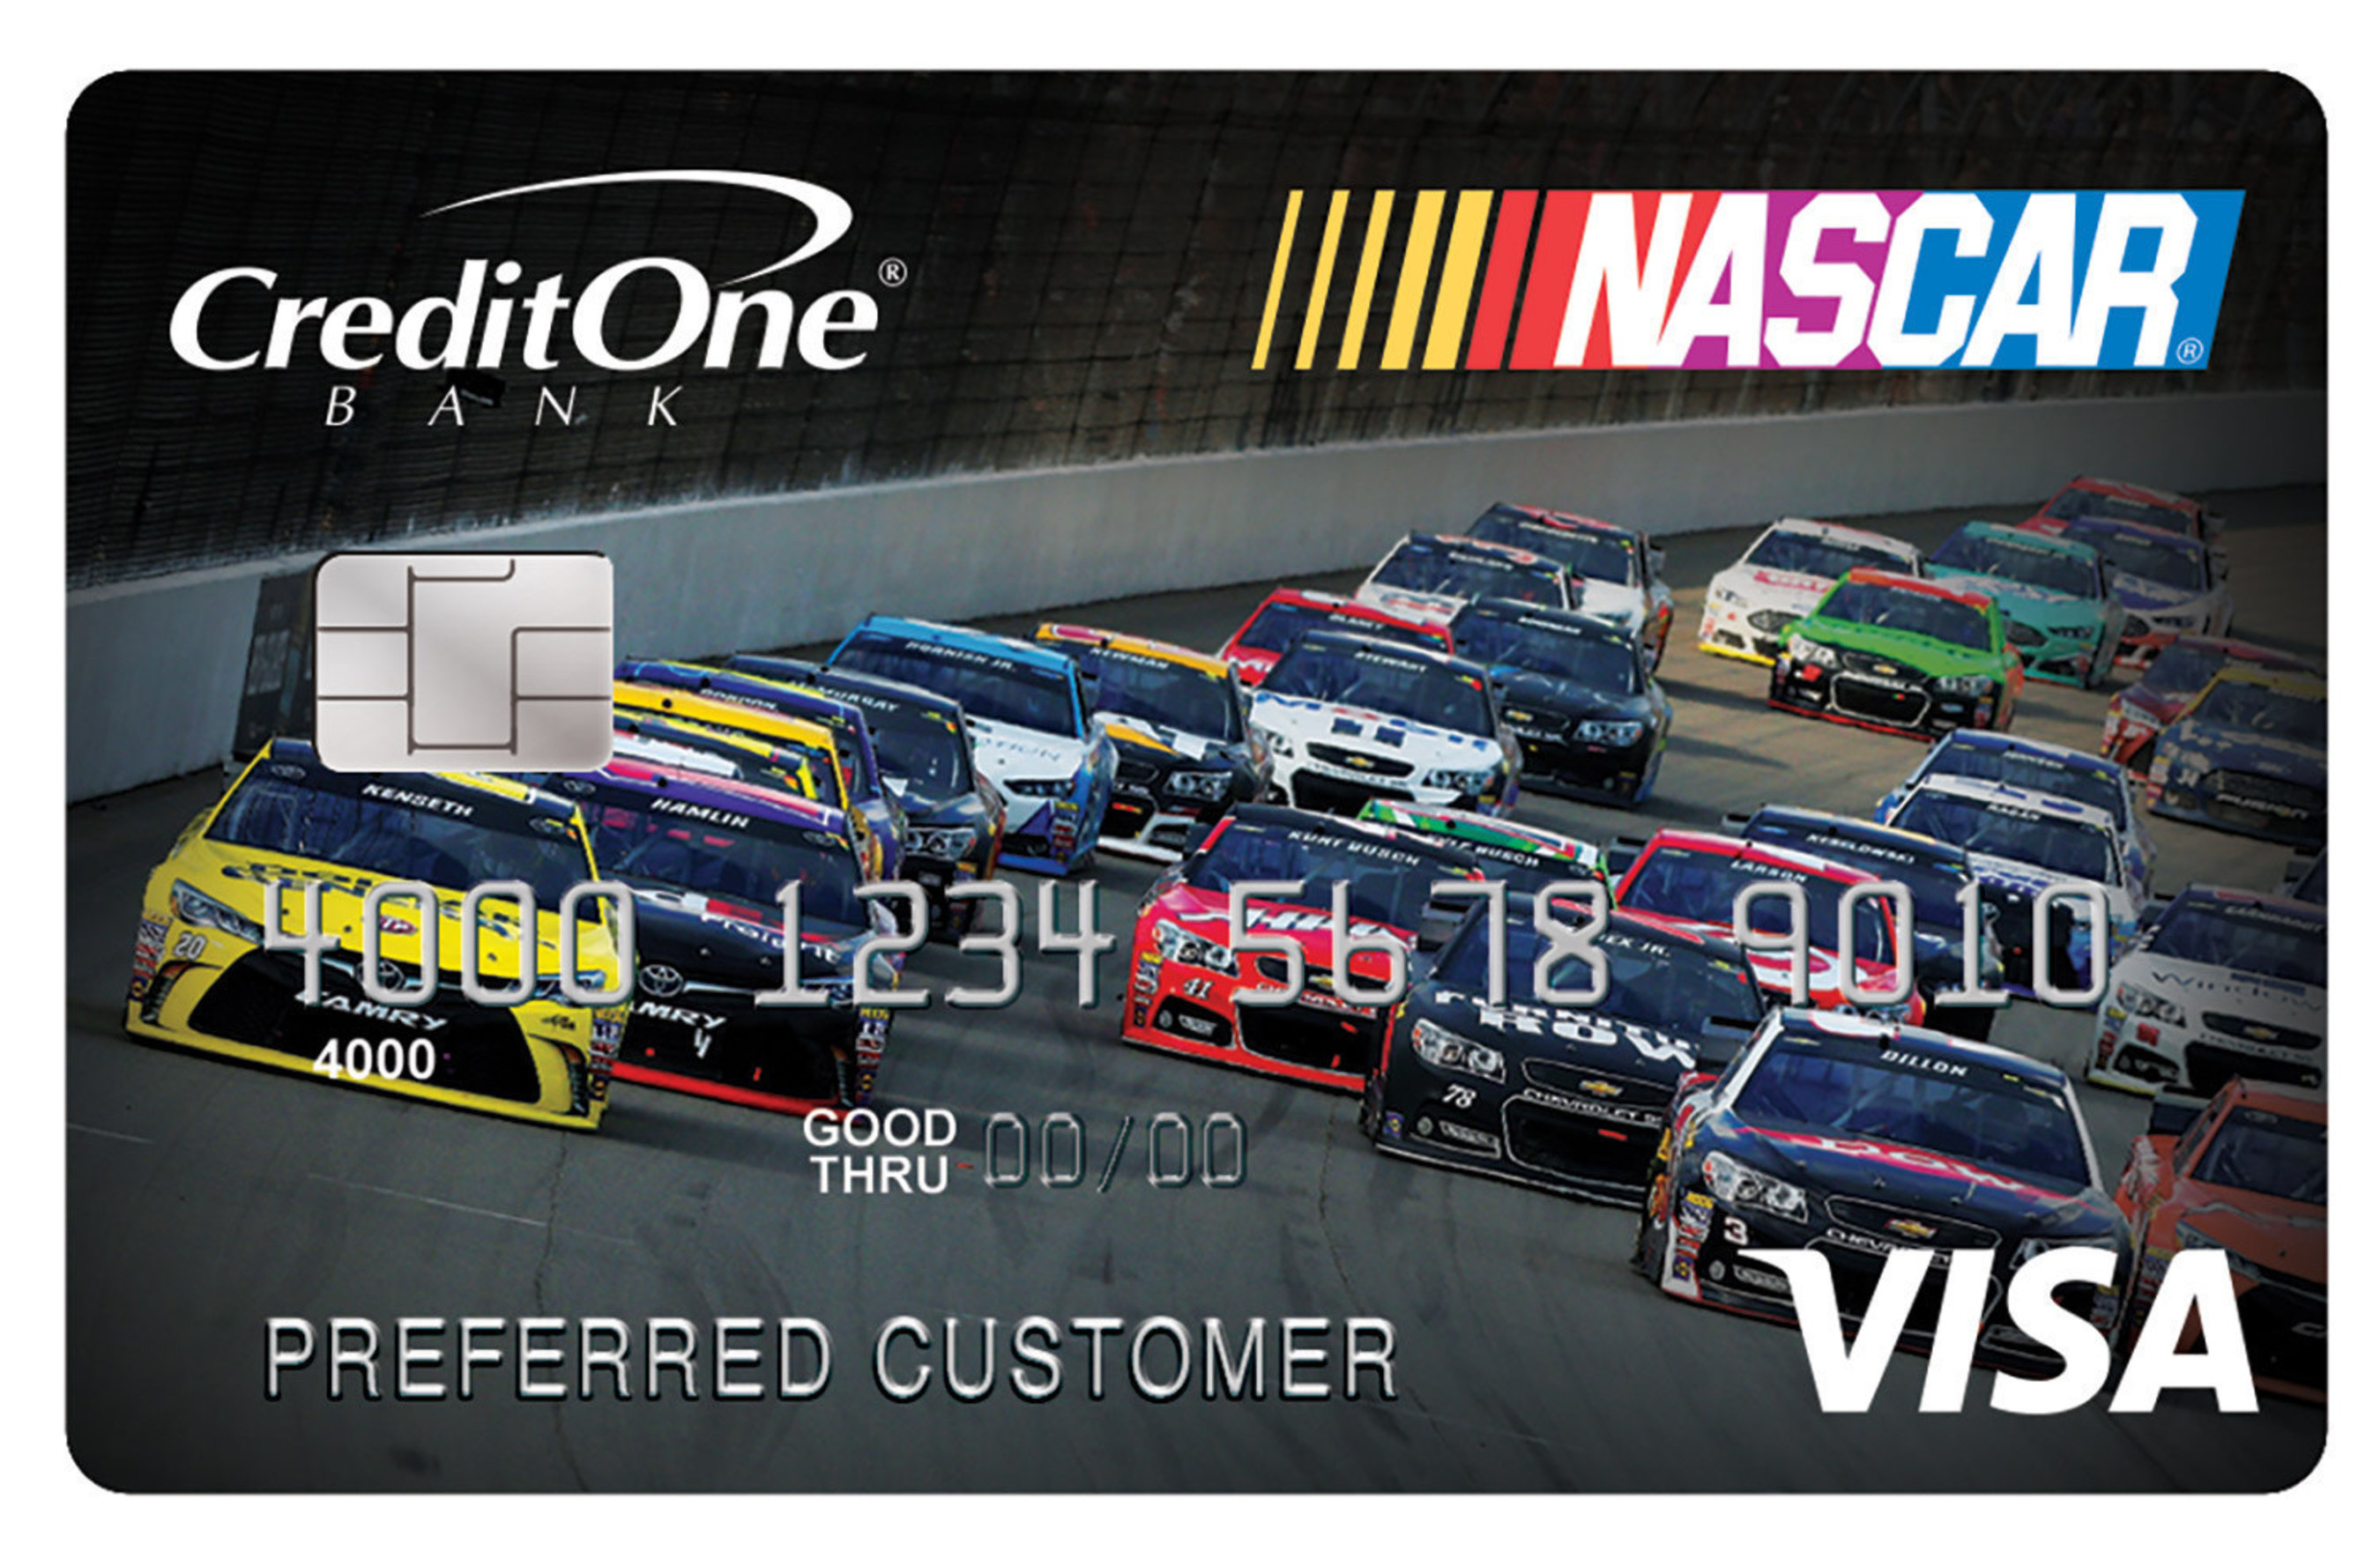 The official credit card of NASCAR